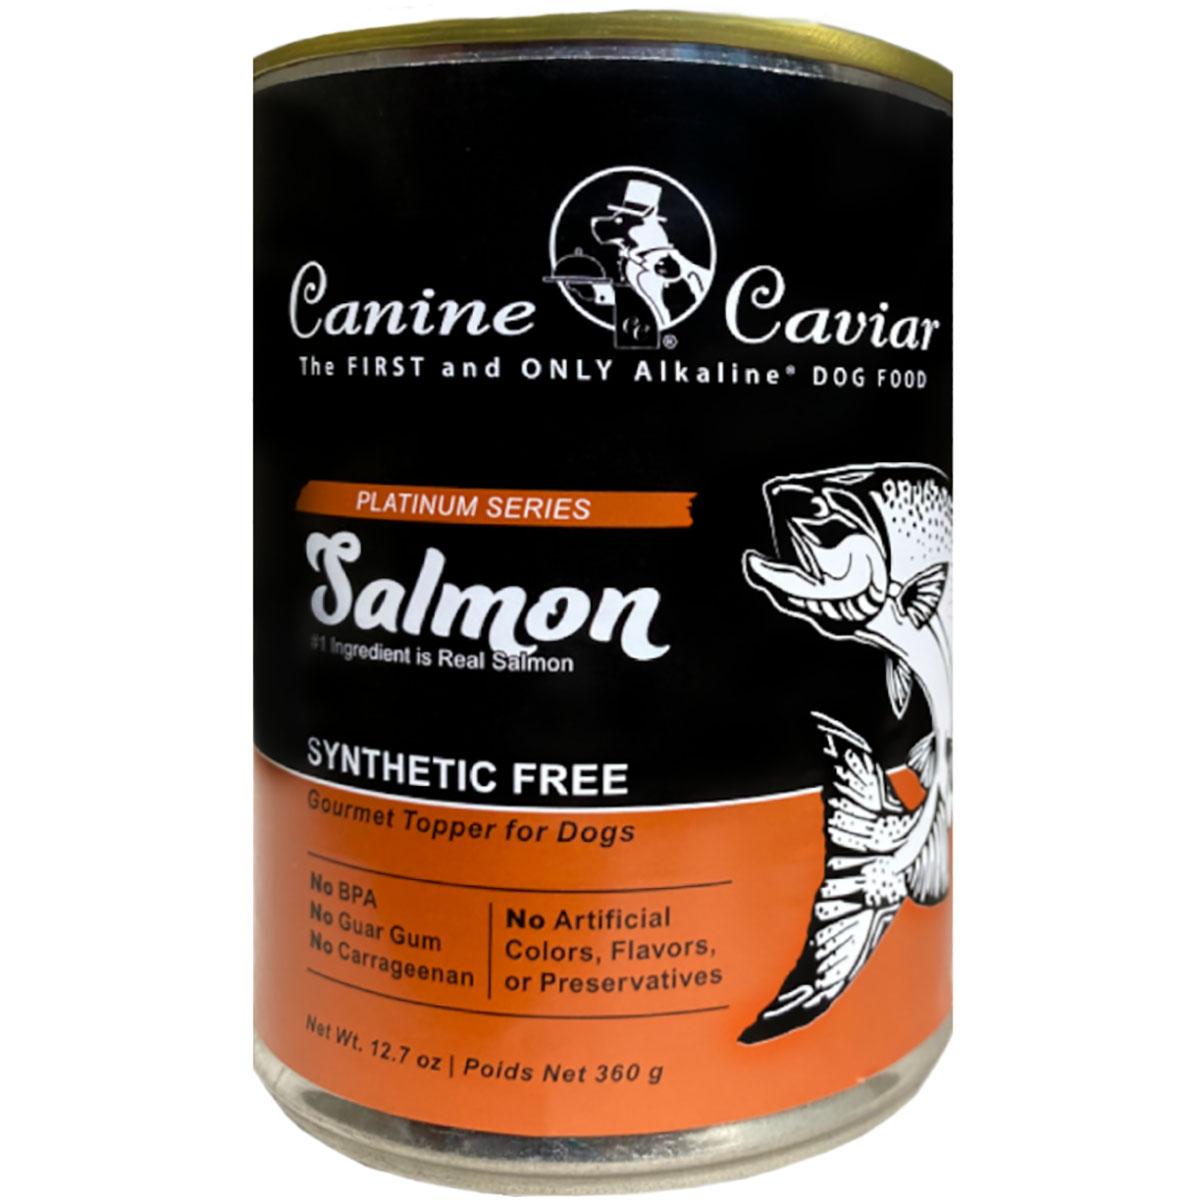 Canine Caviar Synthetic Free Wild Salmon Canned Dog Food